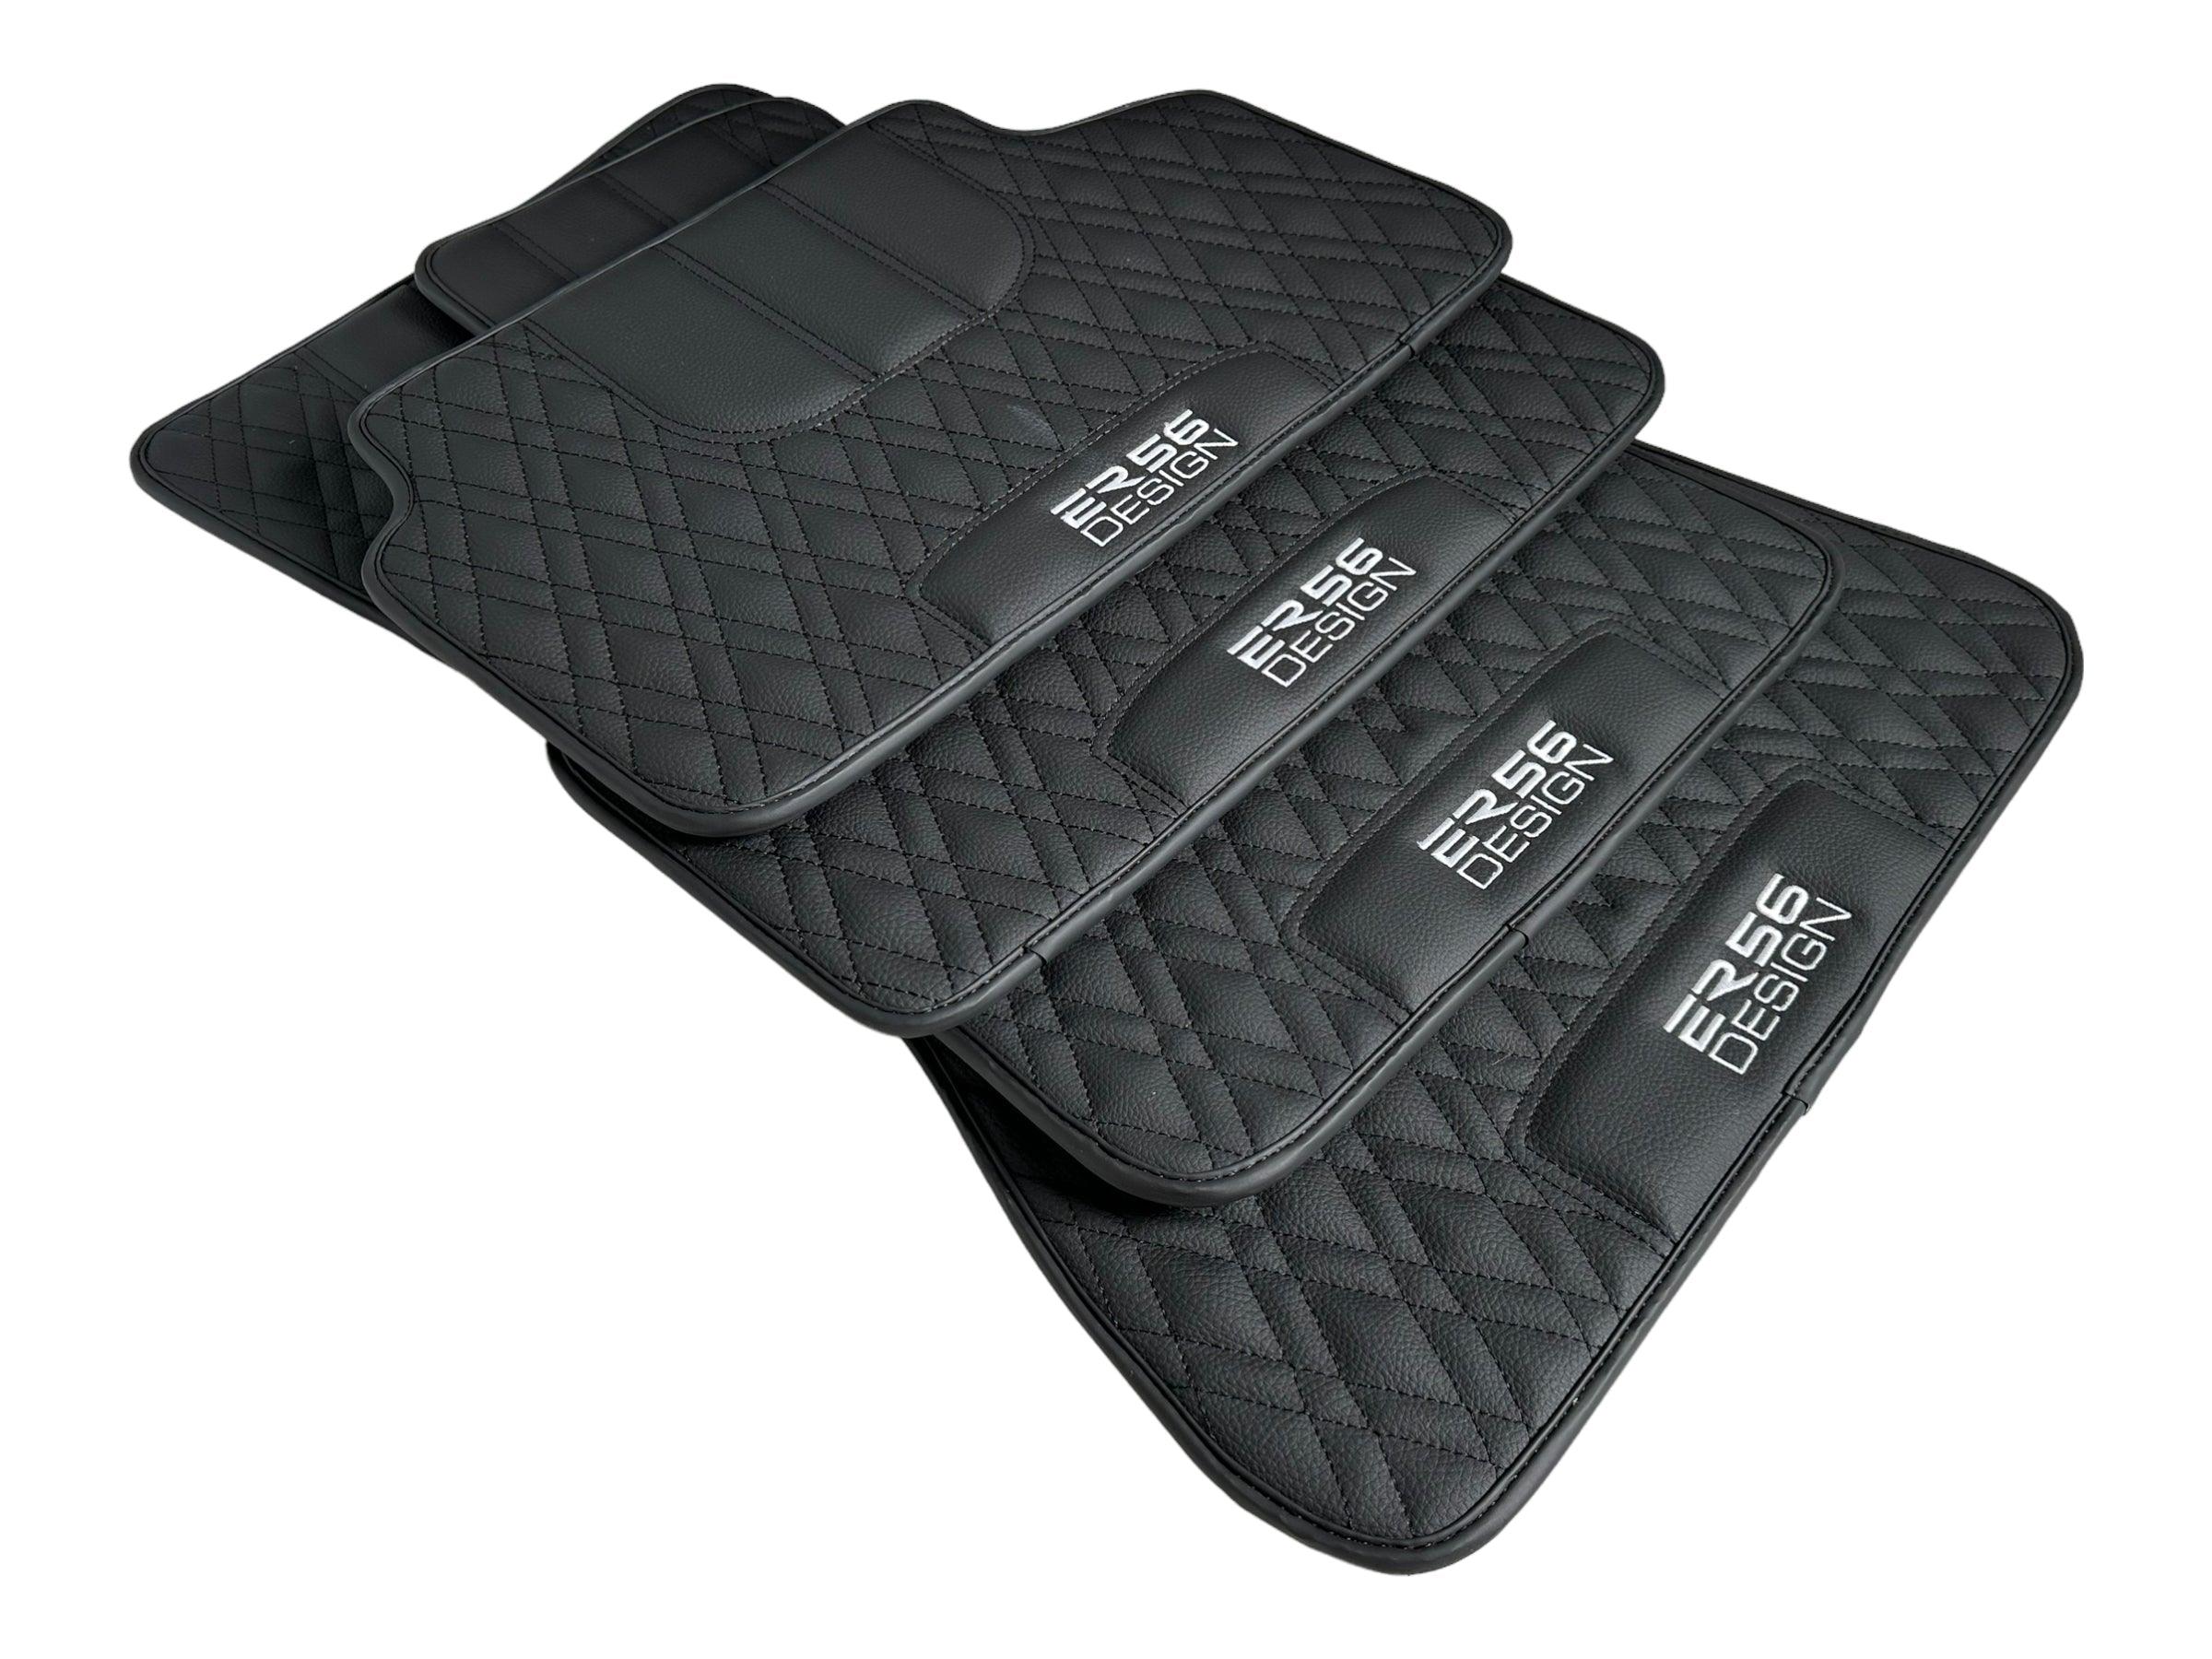 Floor Mats For BMW 8 Series Gran Coupe G16 Black Leather Er56 Design - AutoWin